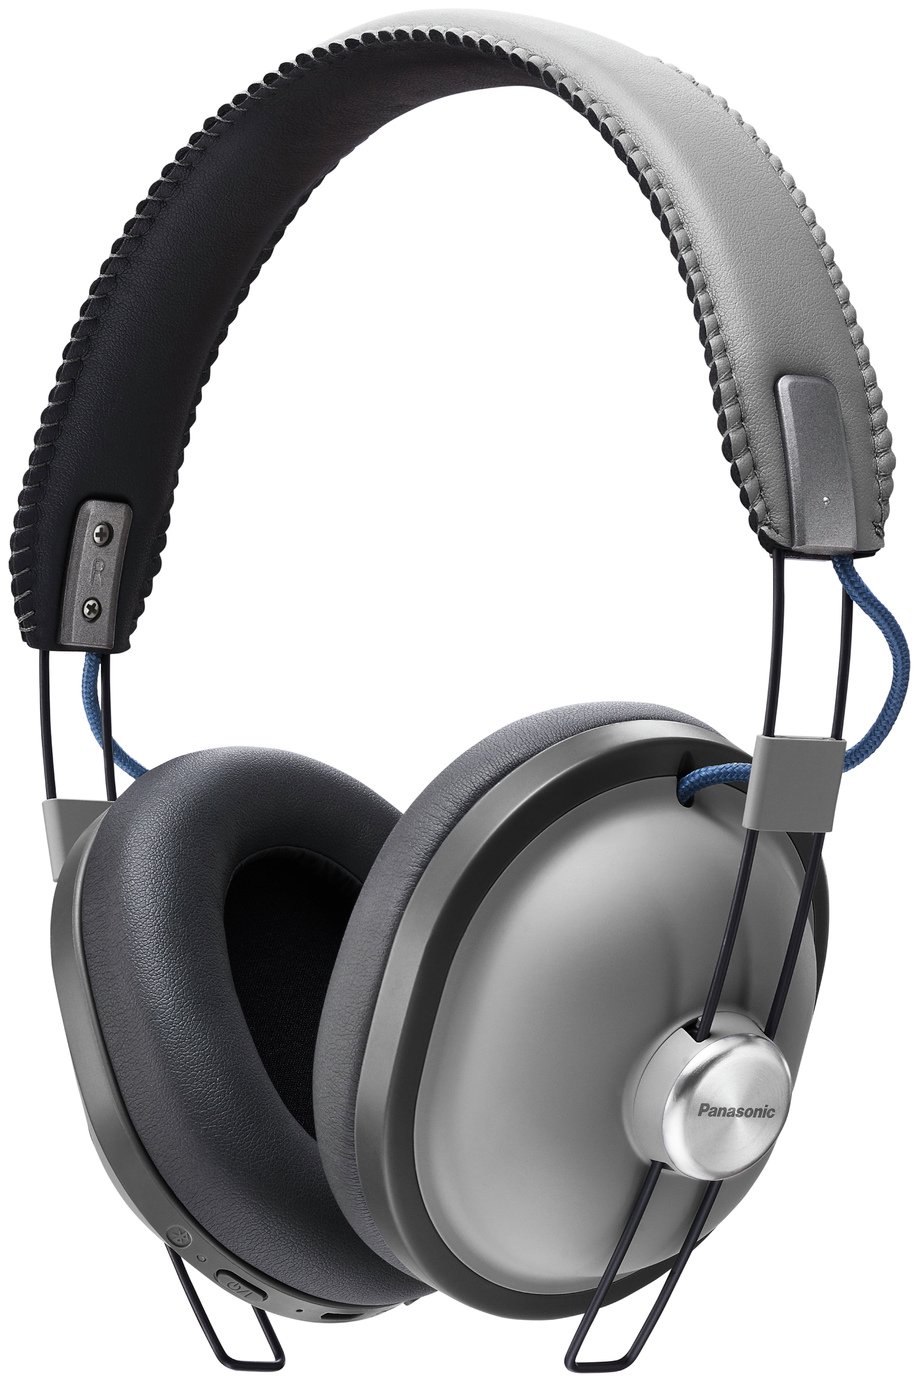 Panasonic RP-HTX80BE Wireless Over-Ear Headphones review